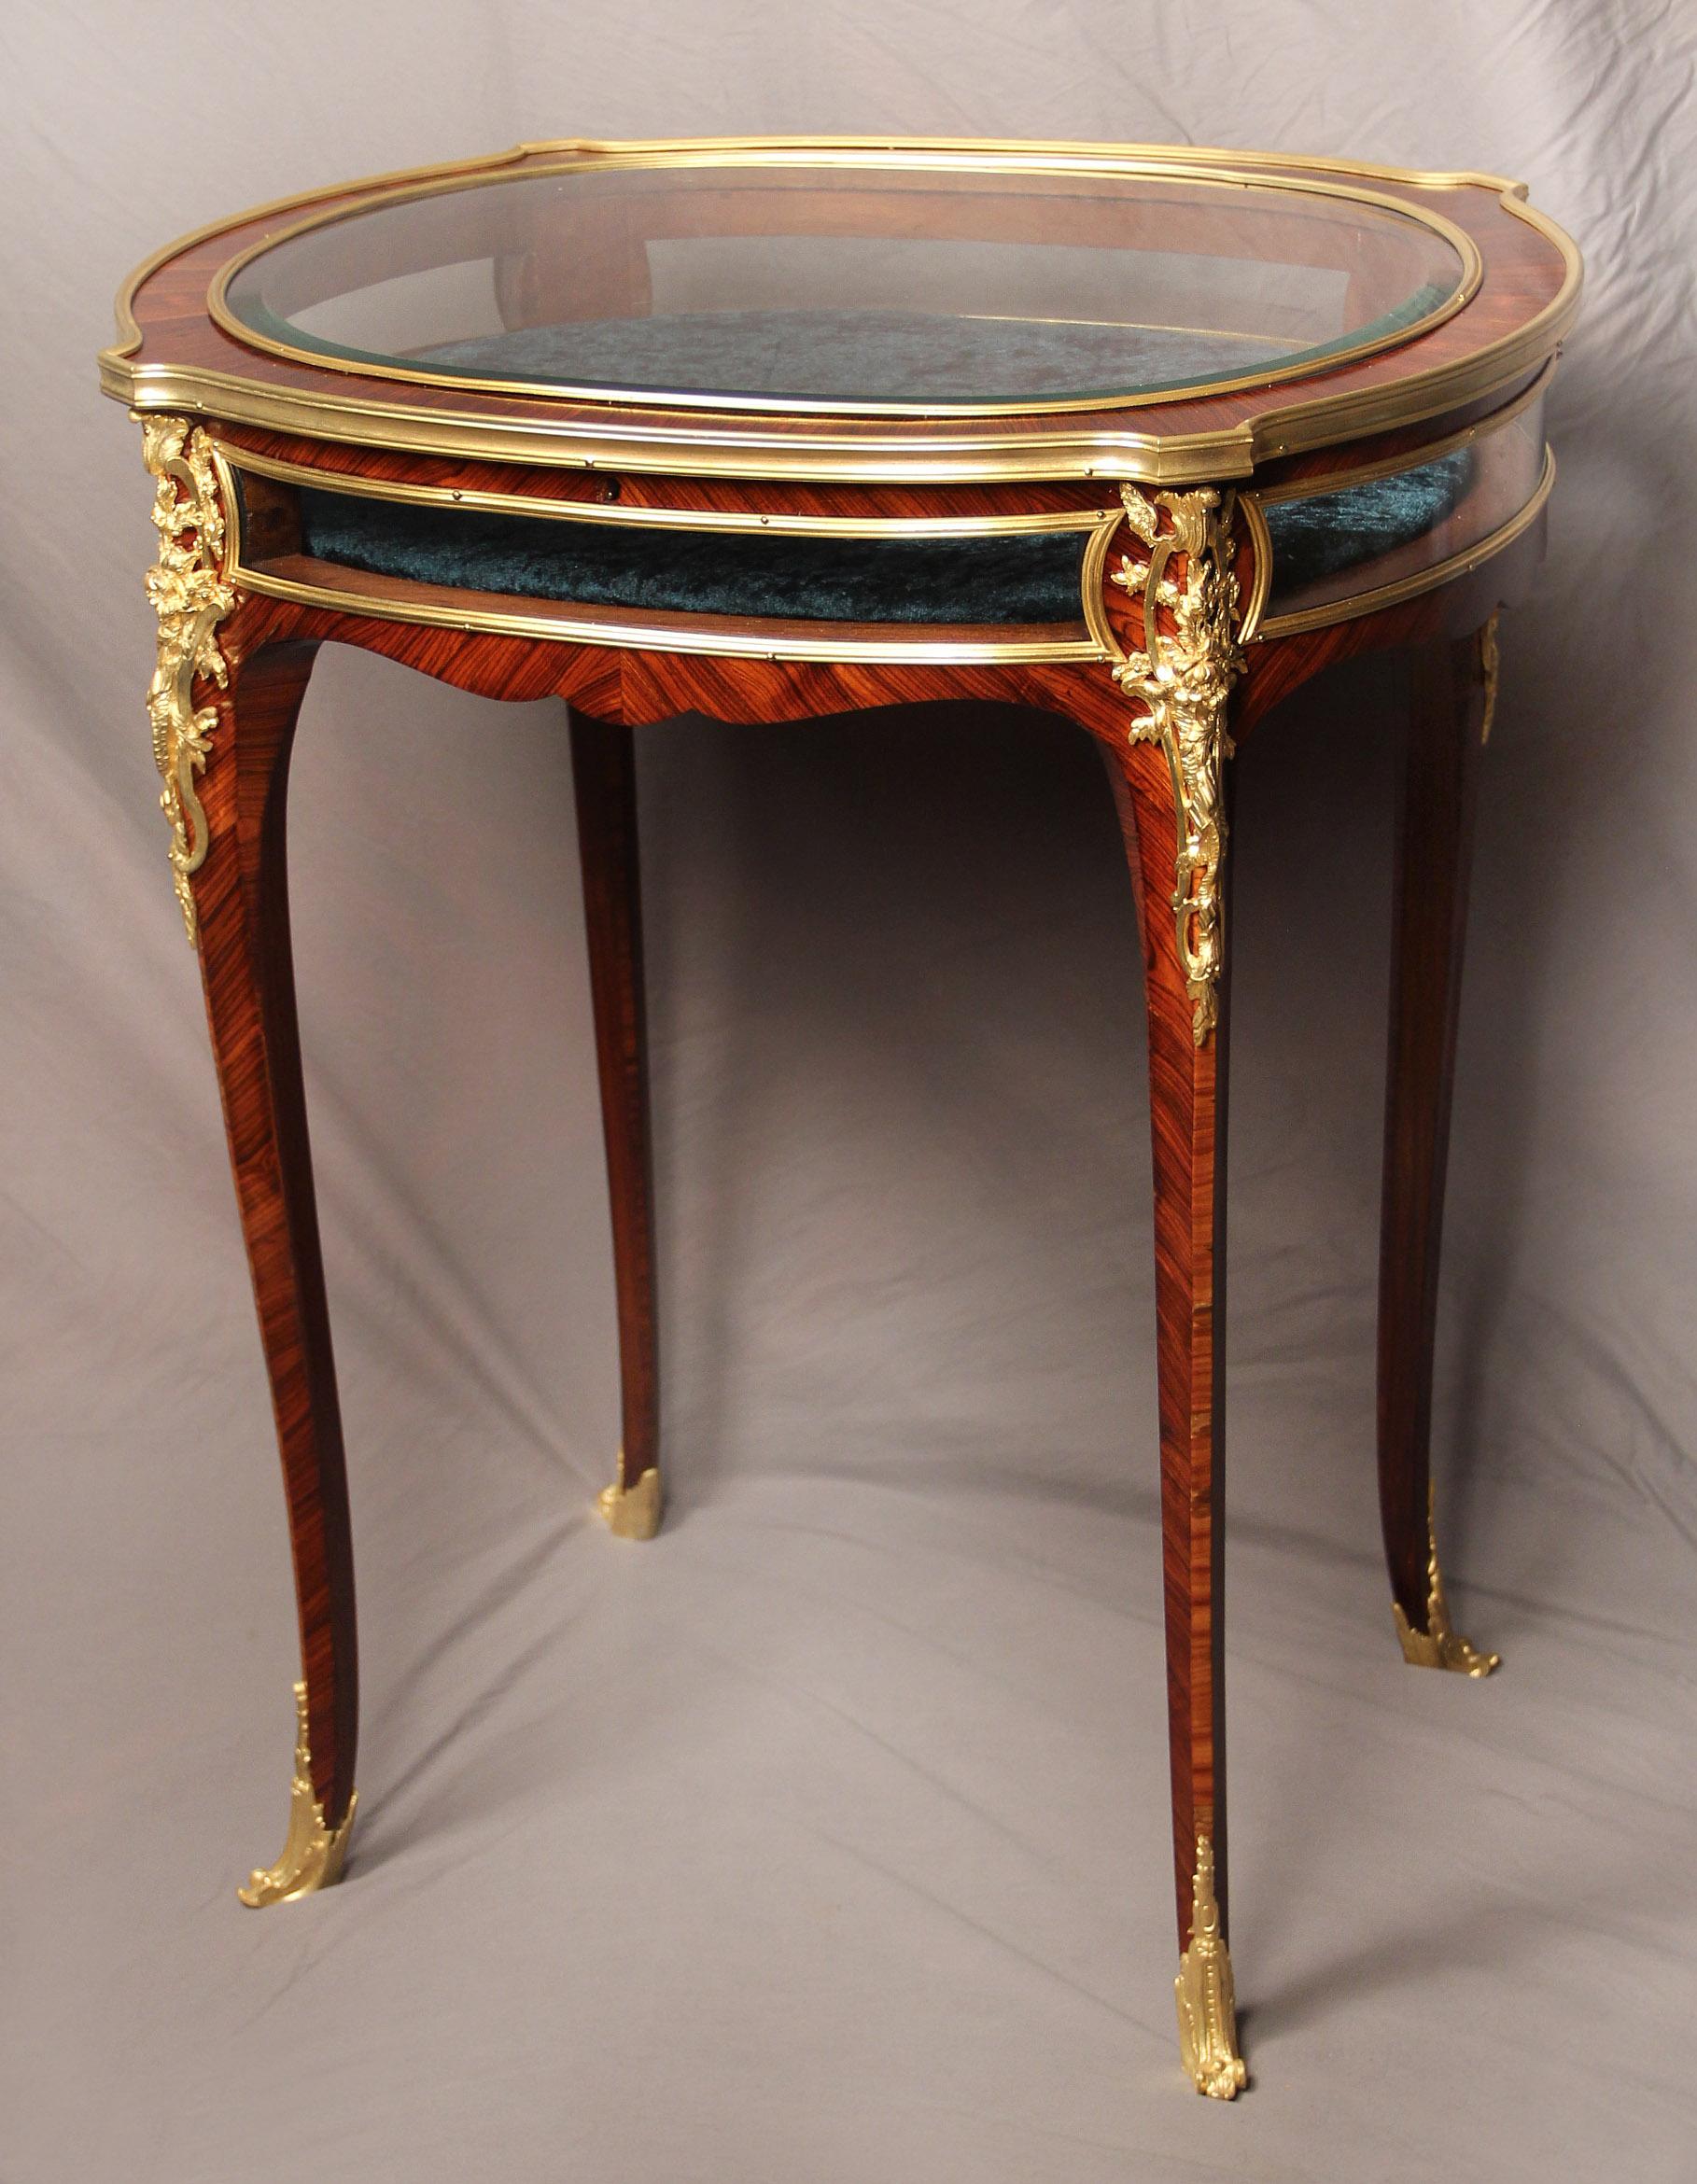 A wonderful late 19th century gilt bronze Mounted Louis XV style Vitrine table by Joseph Zwiener

Joseph Zwiener

The oval shaped table with a beveled glass top encircled by a bronze frieze, above four side glass panels, the canted angles set